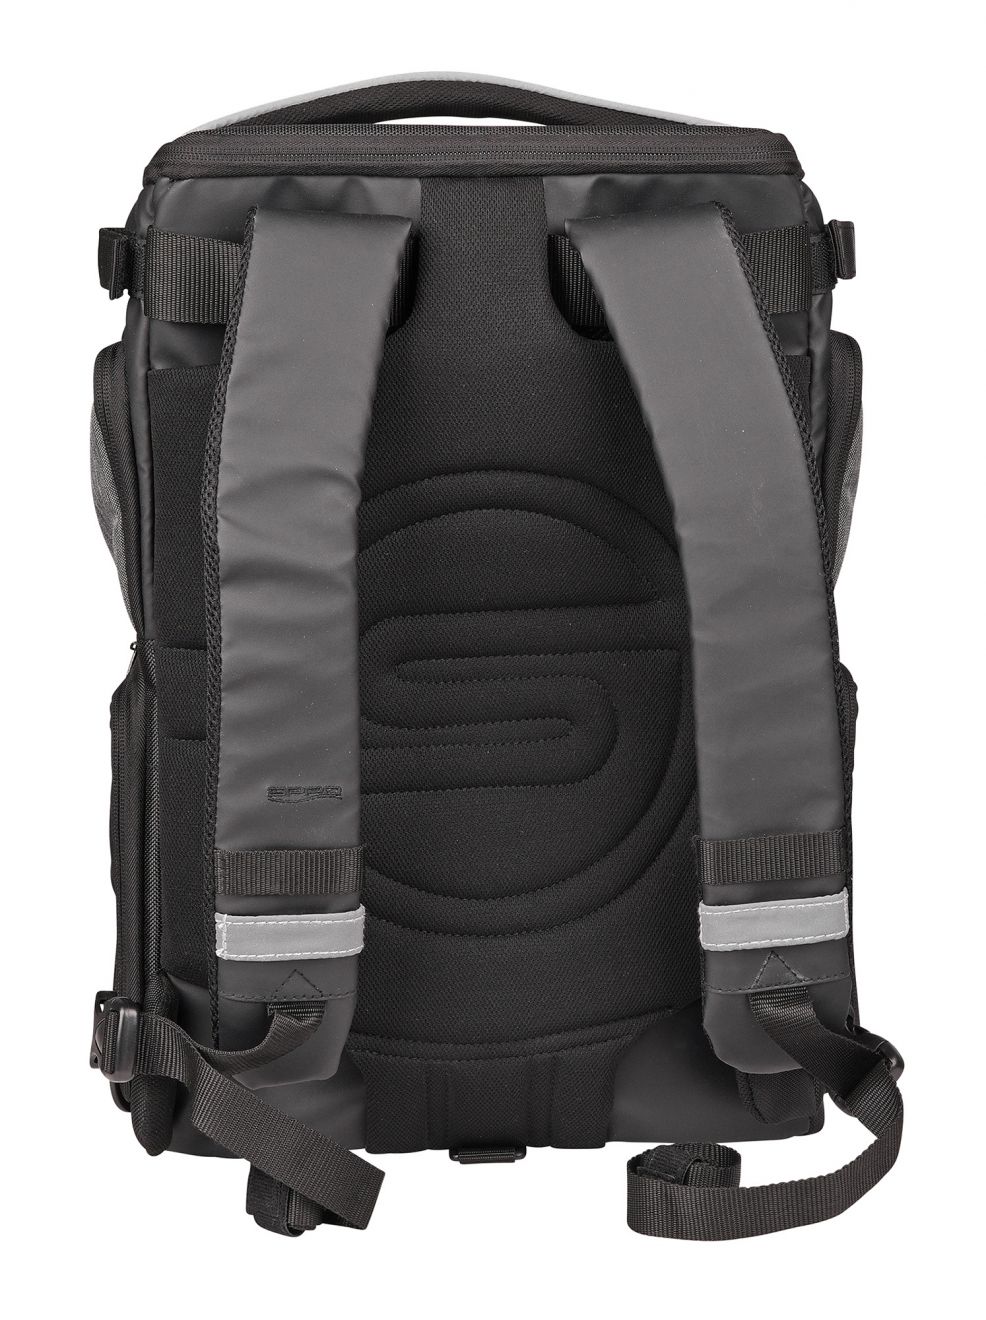 Spro Freestyle Backpack 35 45 x 35 x 17cm (incl. 6 tackle boxes)